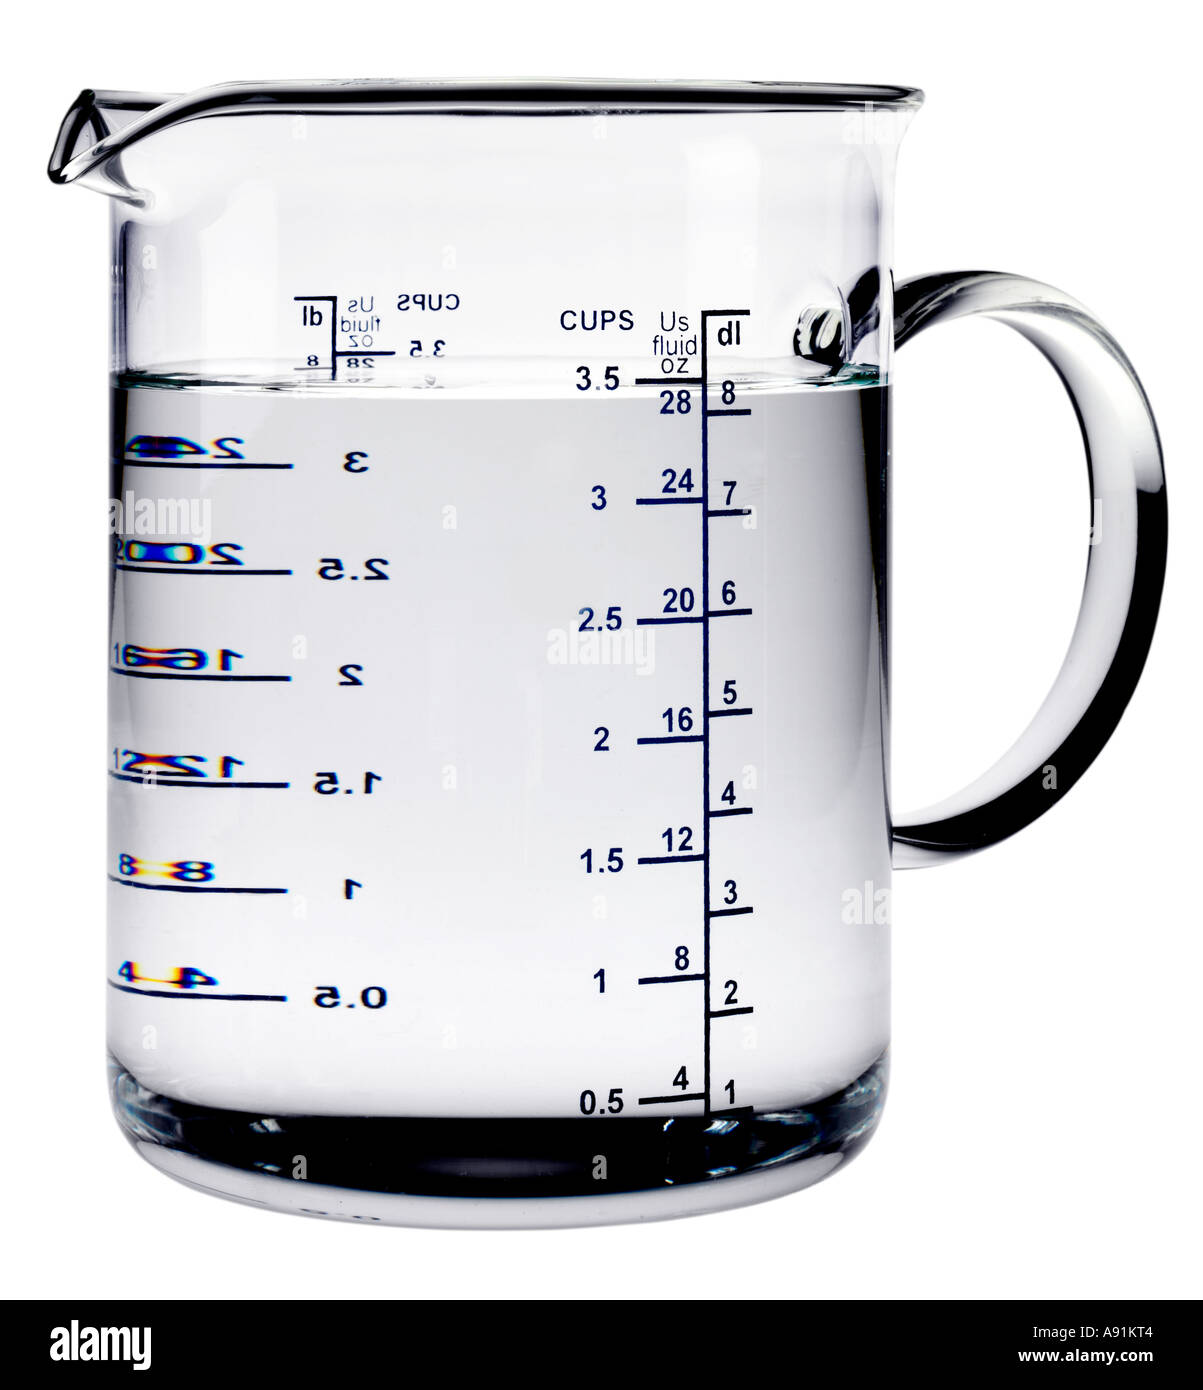 Bakery Baking Plastic Water Liquid Measuring Cup 300ml Clear Blue